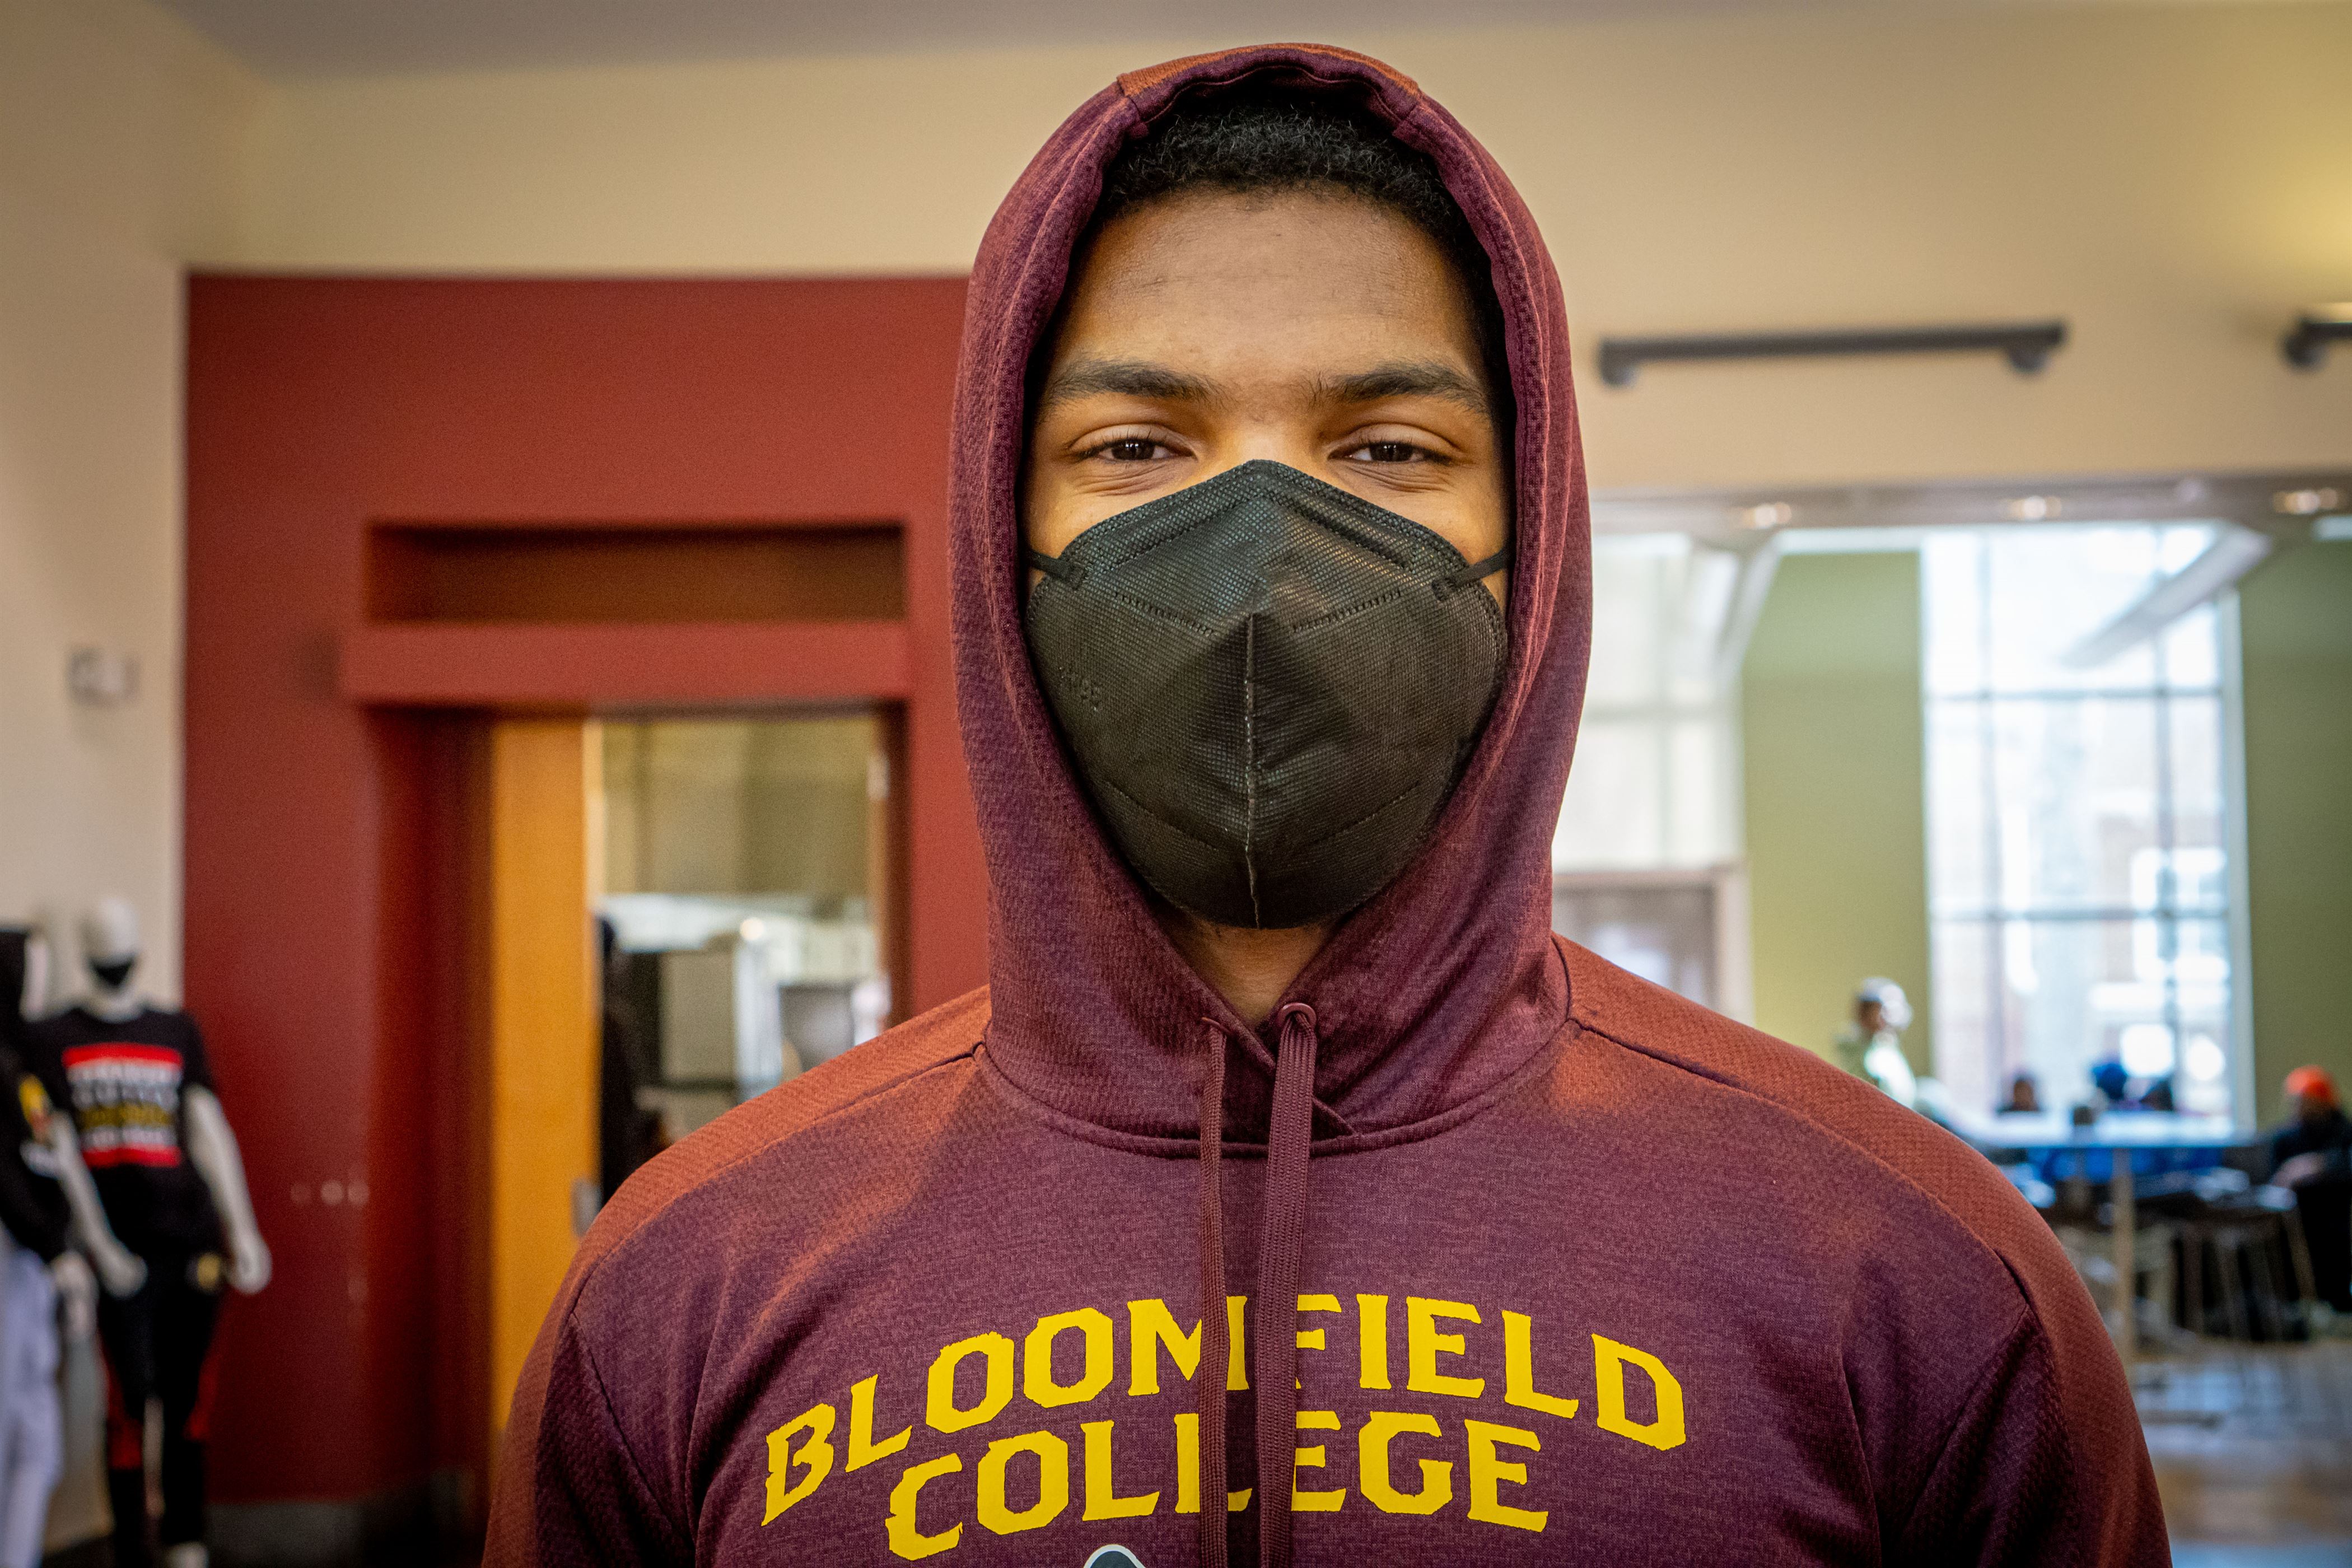 Antonio Tordon, a senior English major at Bloomfield College, believes this partnership will be a good thing for students.